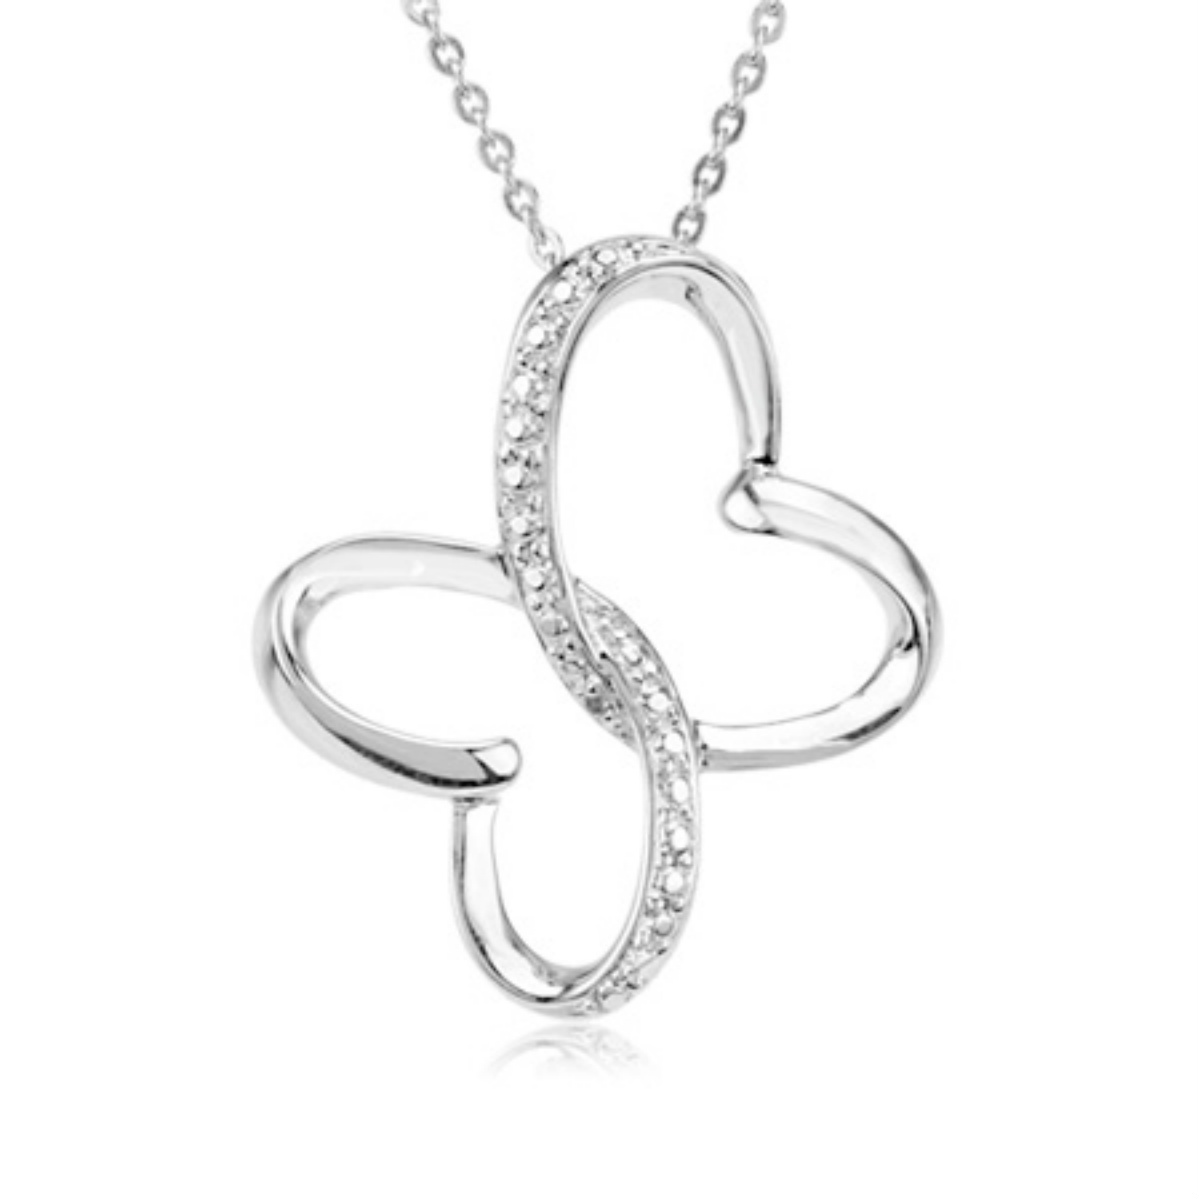 Diamond 'Wings of Comfort' Rhodium Plate Sterling Silver Necklace.